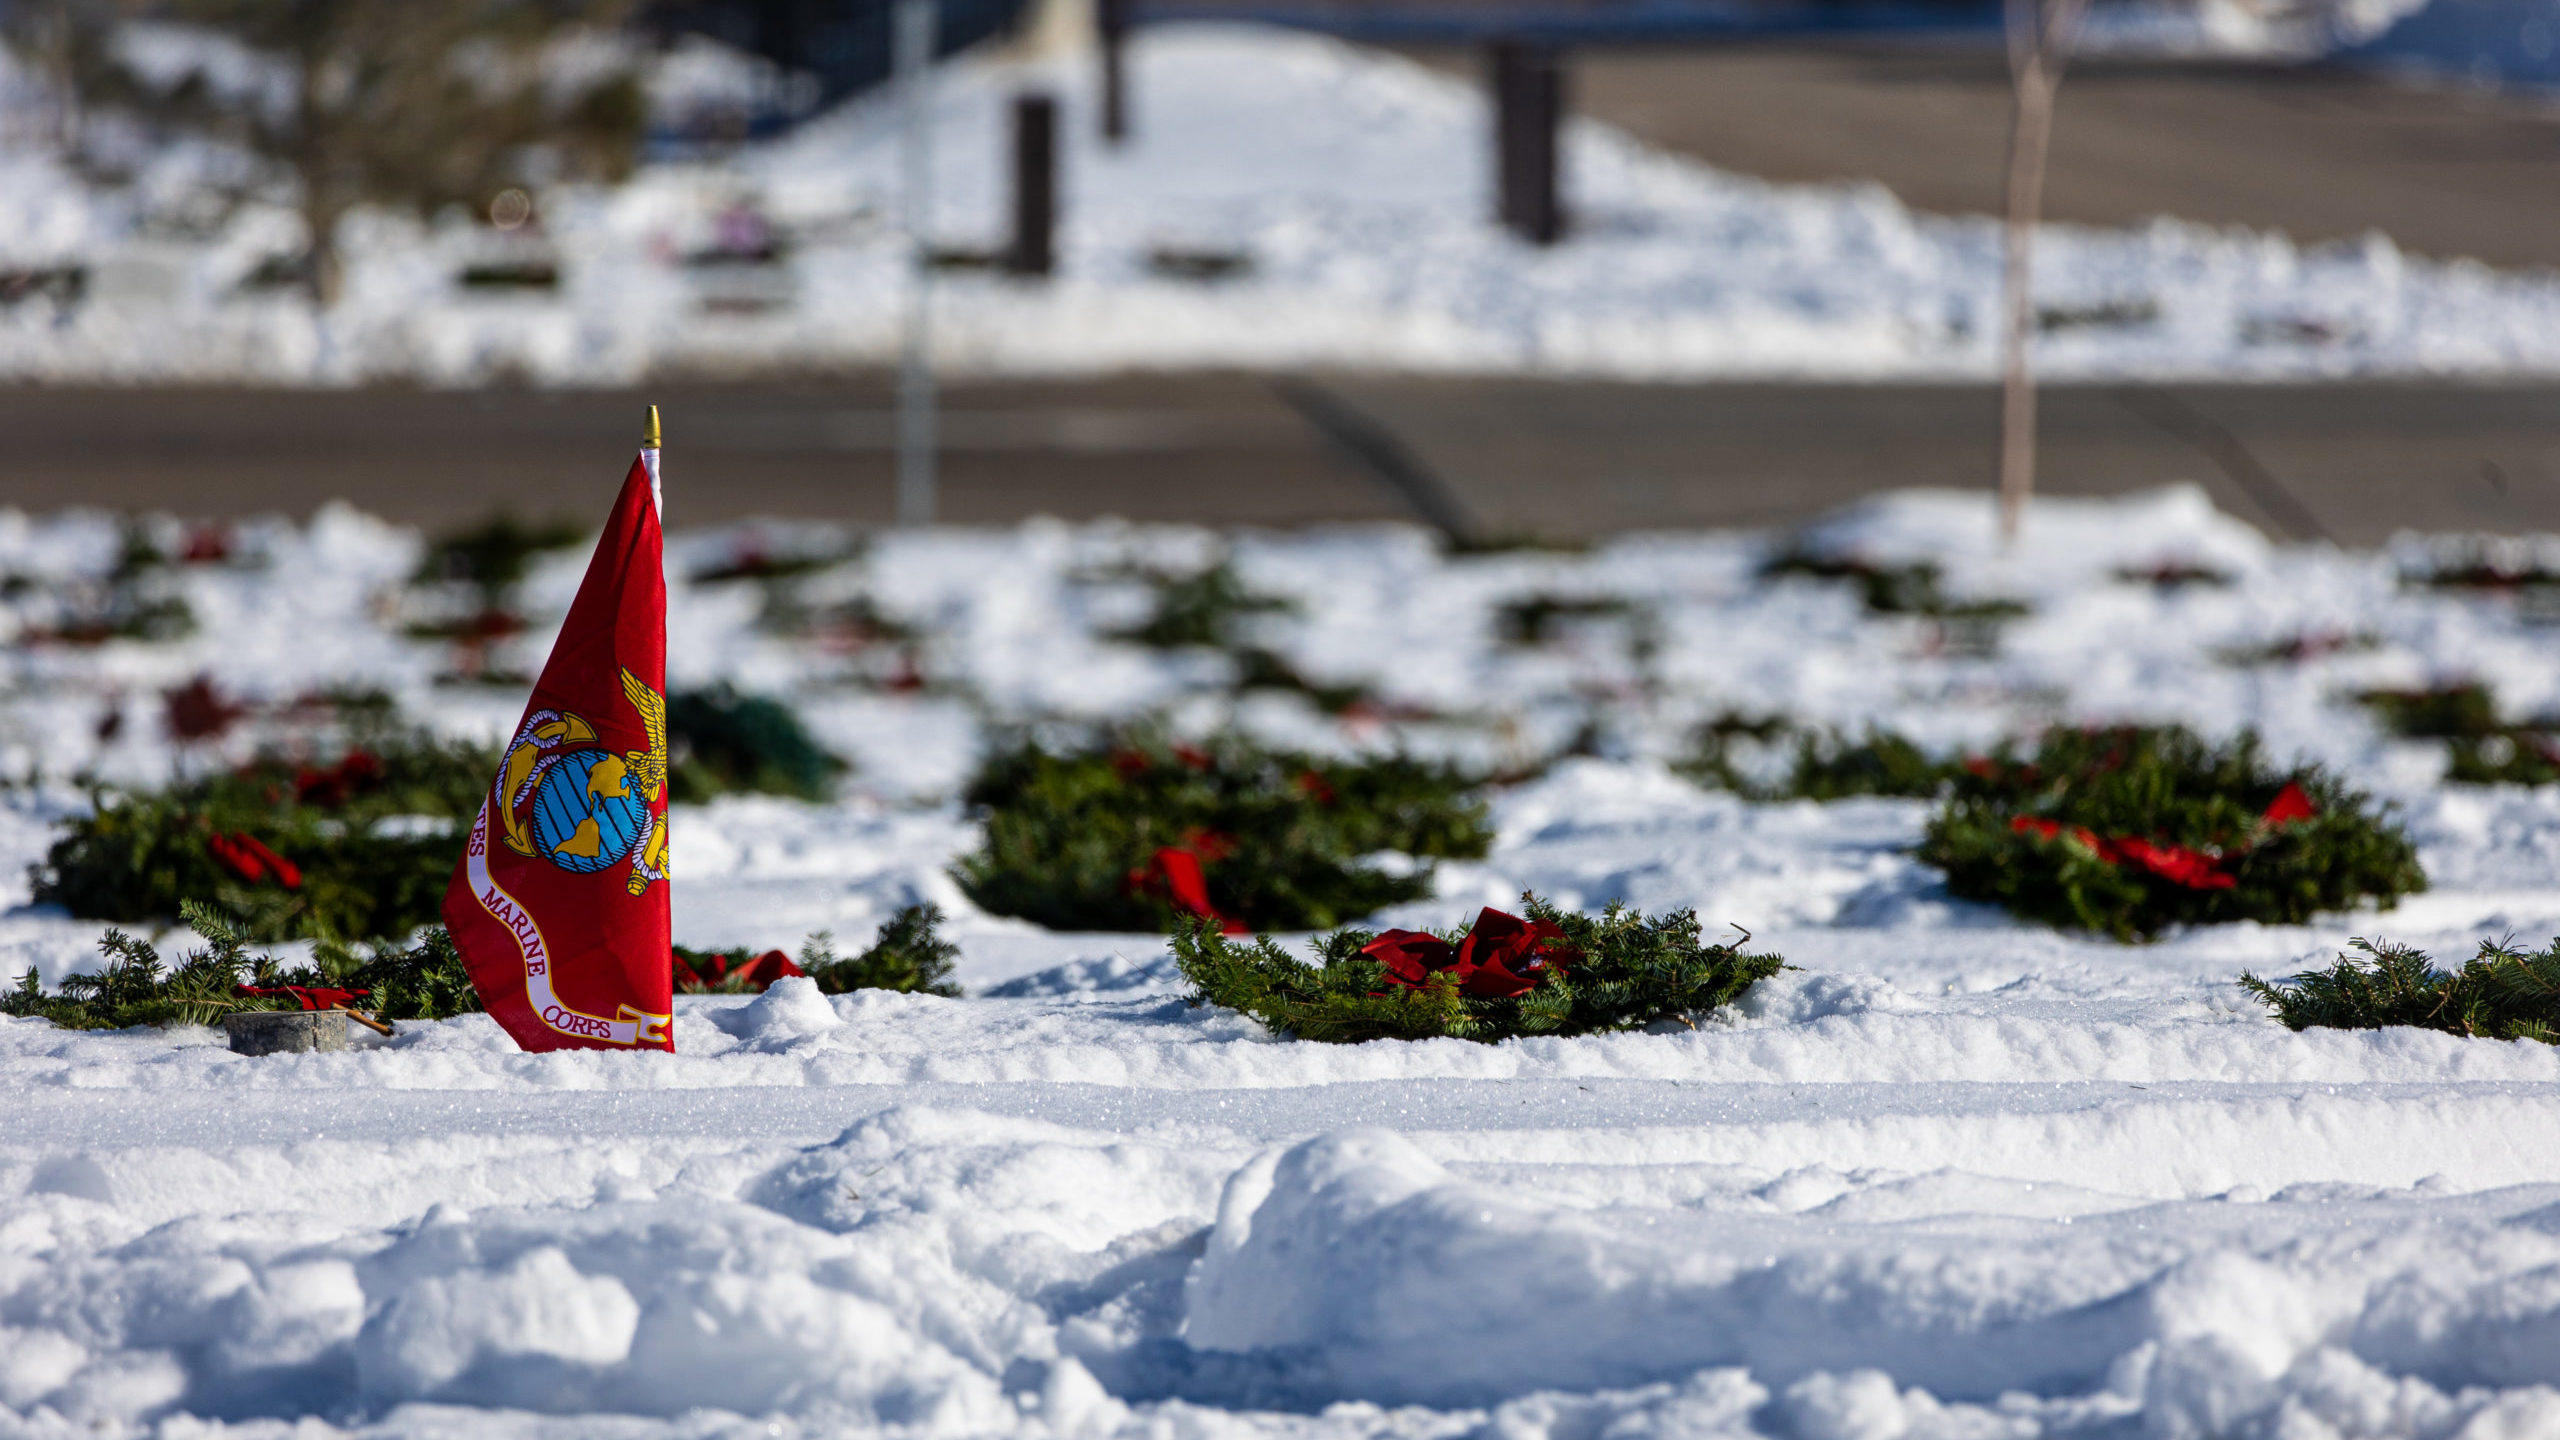 More than 2,400 veteran's graves at the Salt Lake City Cemetery will get wreaths this Saturday as p...